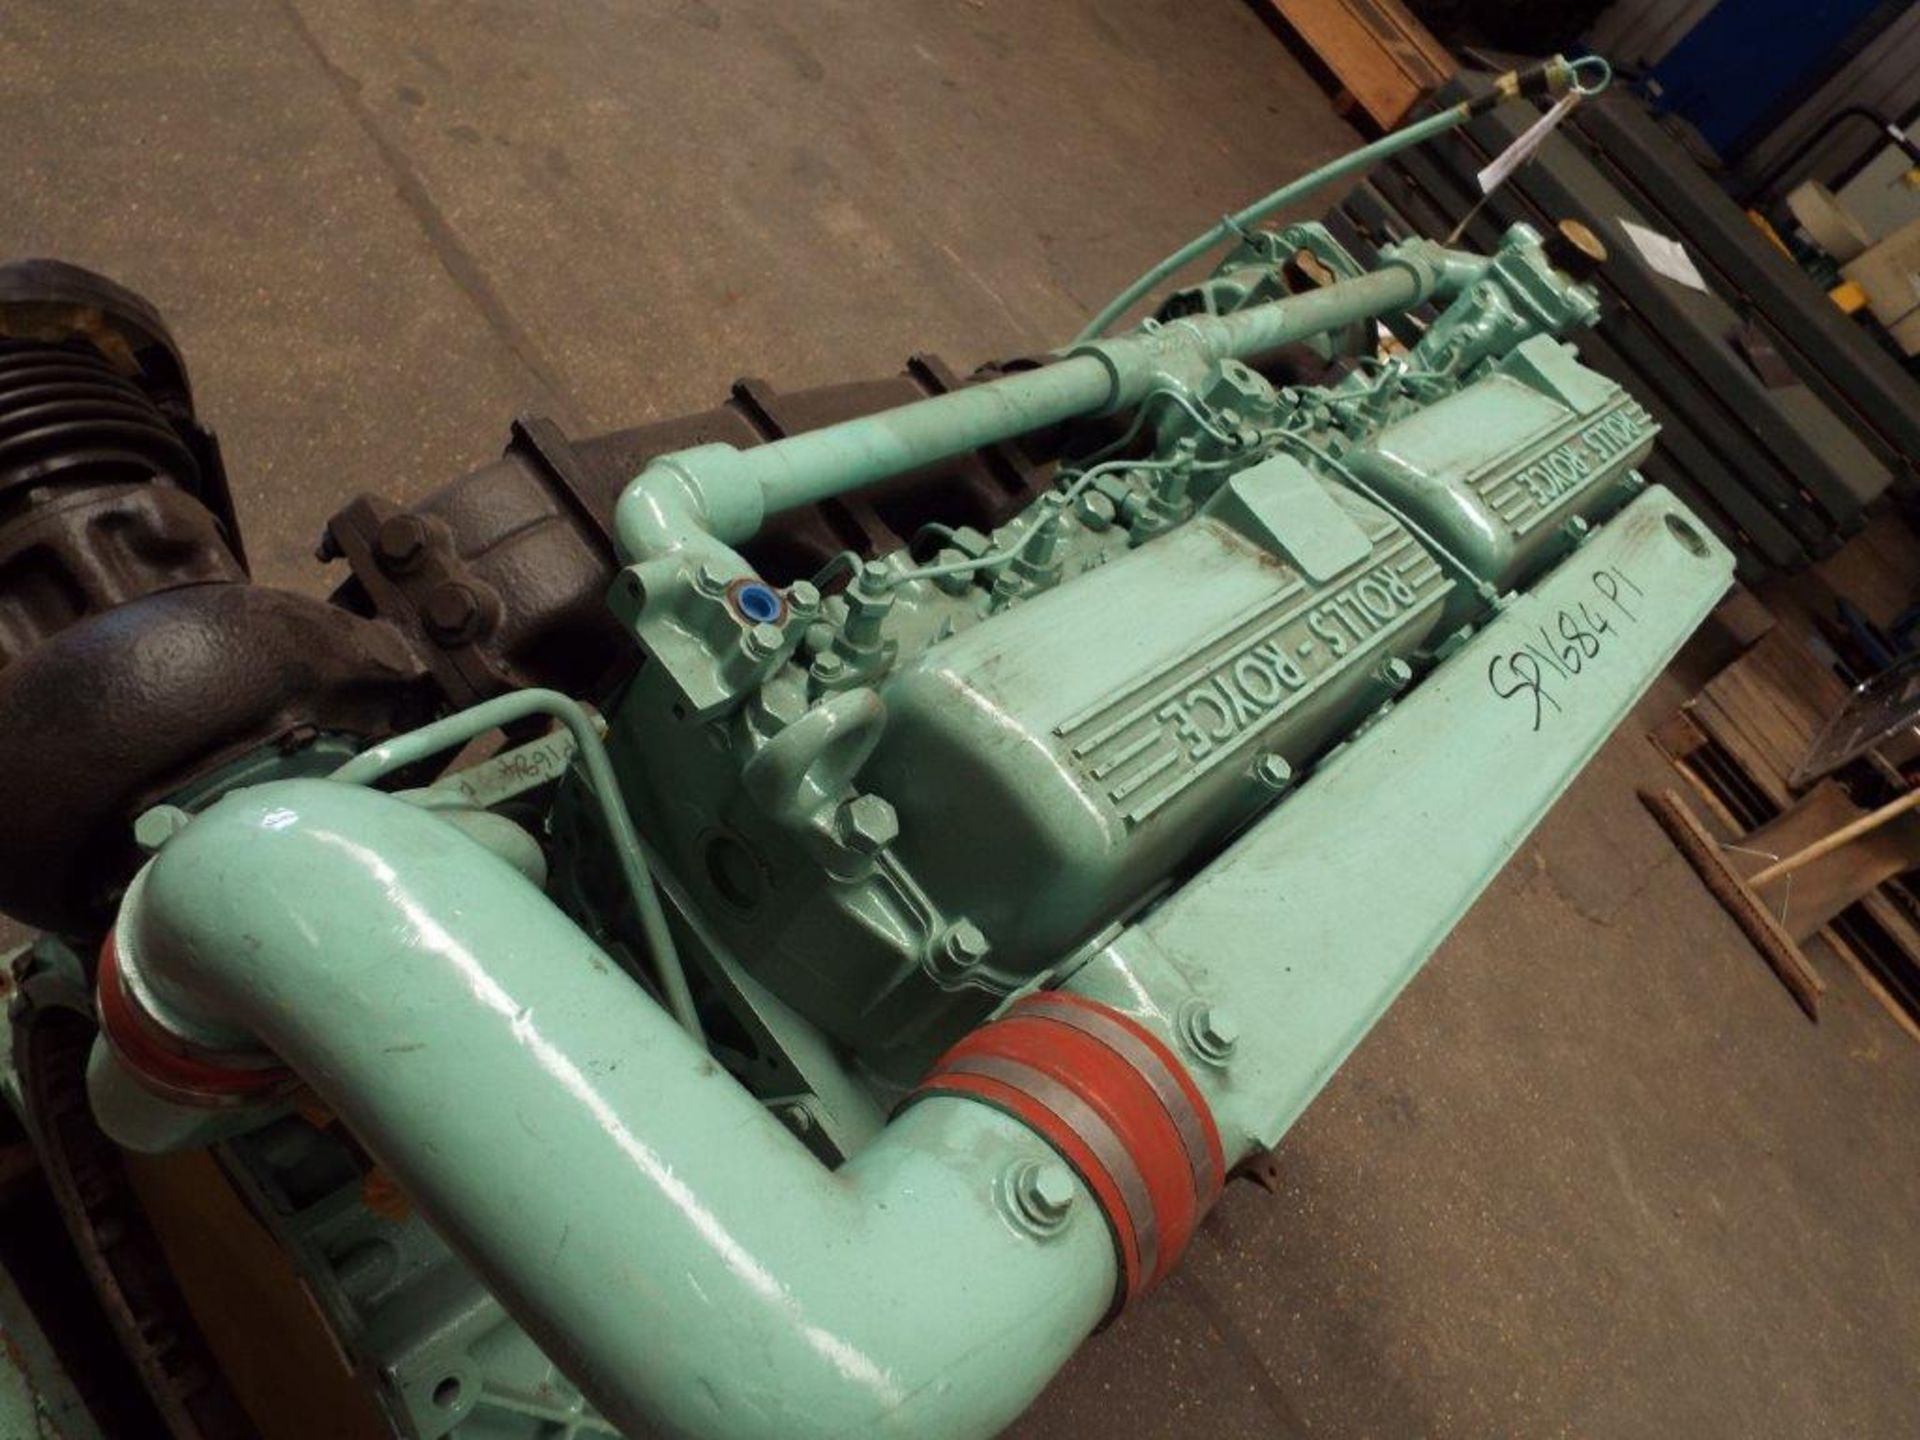 A1 Reconditioned Rolls Royce/Perkins 290L Straight 6 Turbo Diesel Engine for Foden Recovery Vehicles - Image 9 of 20